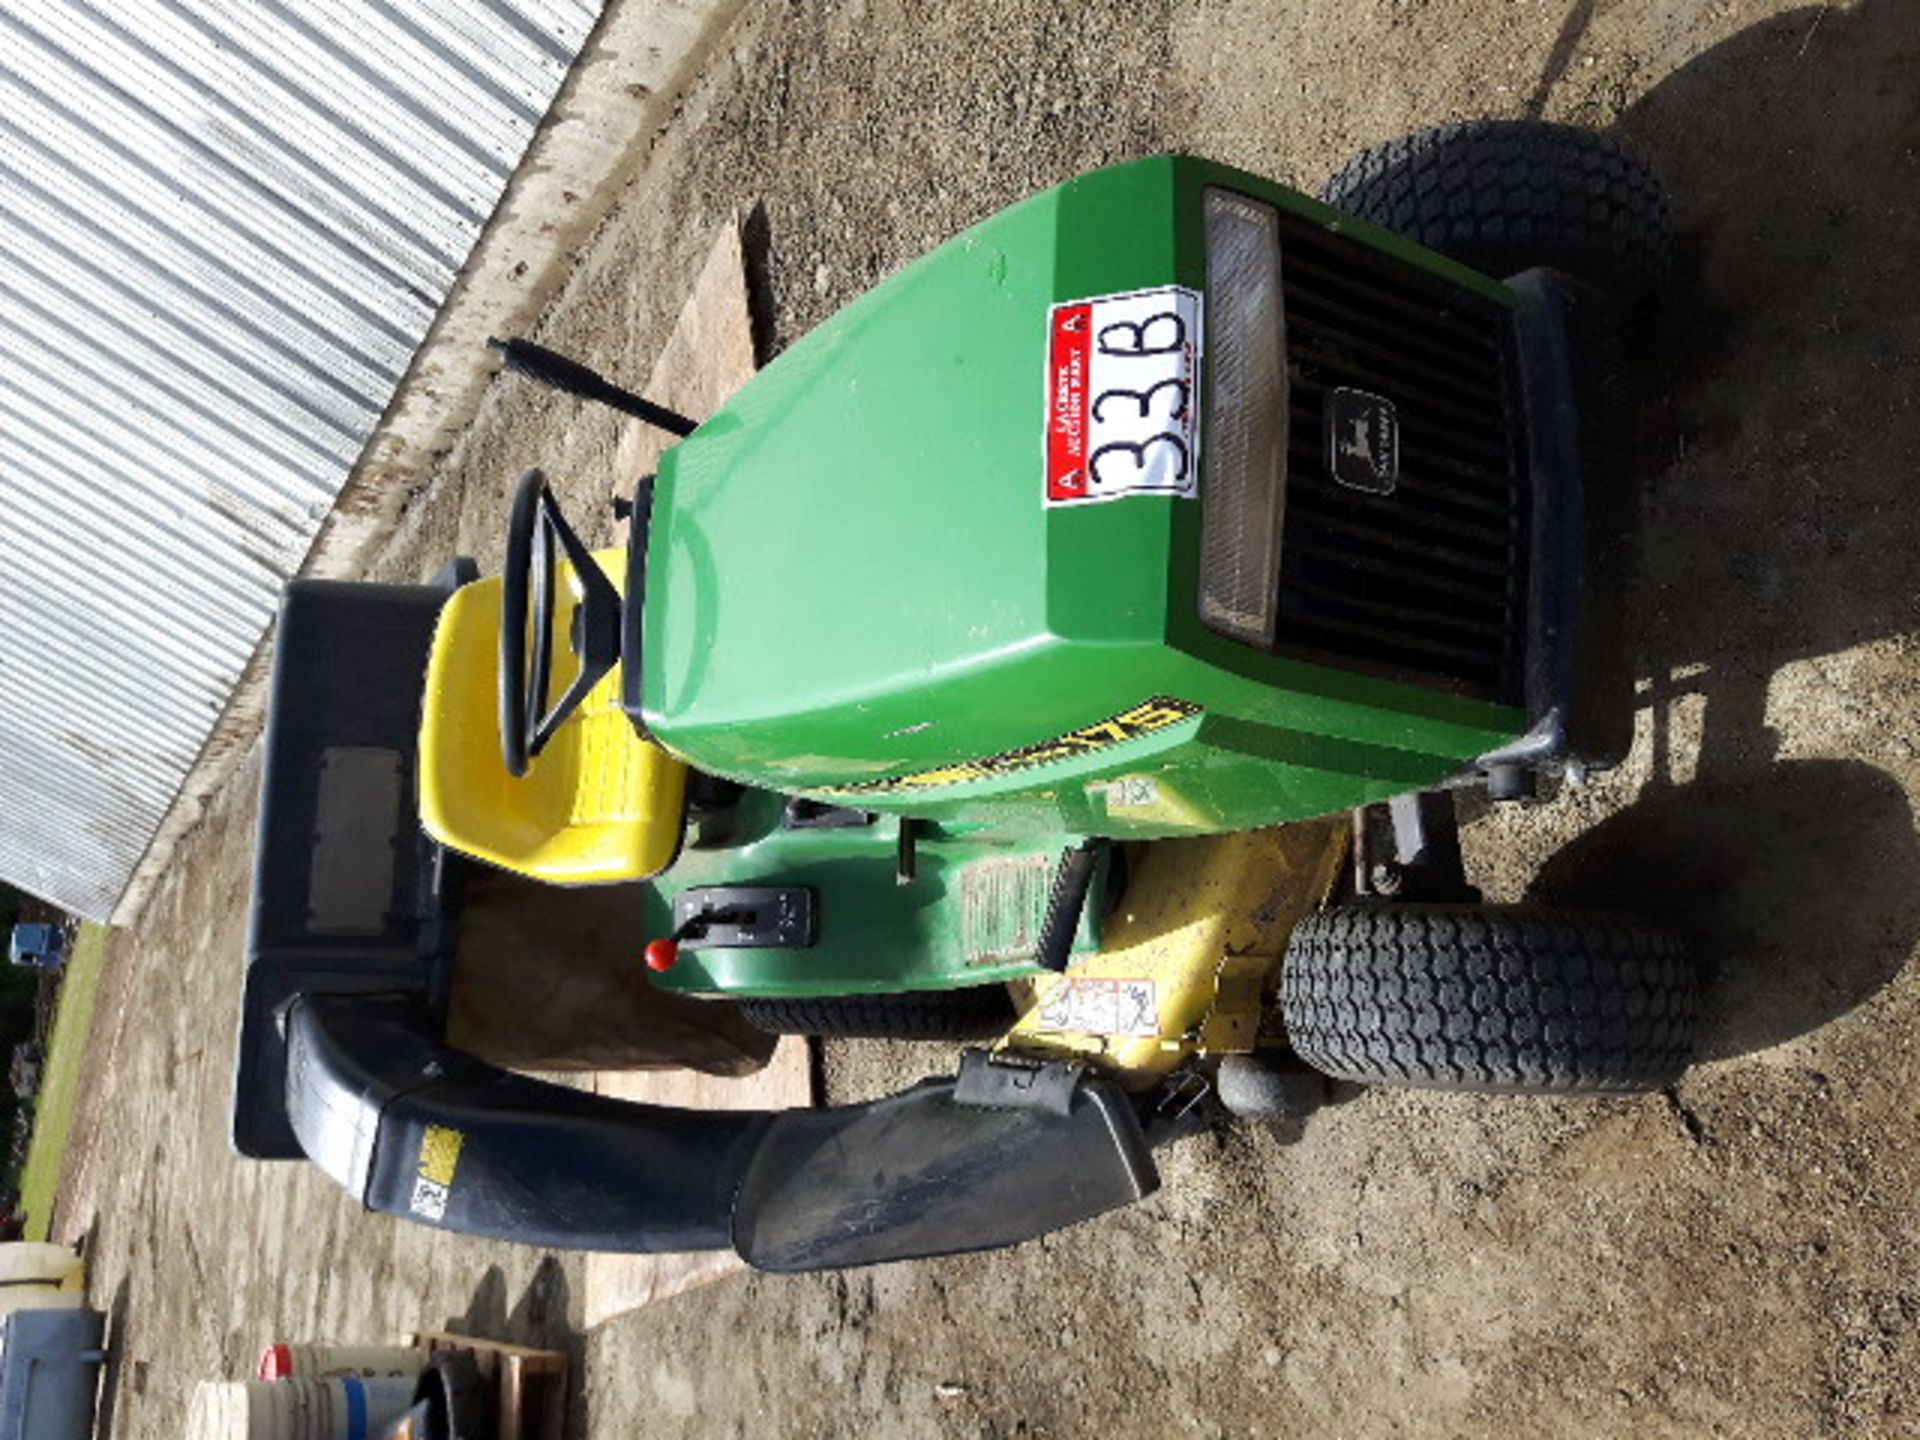 JD 175 Lawn Tractor w/Bagger